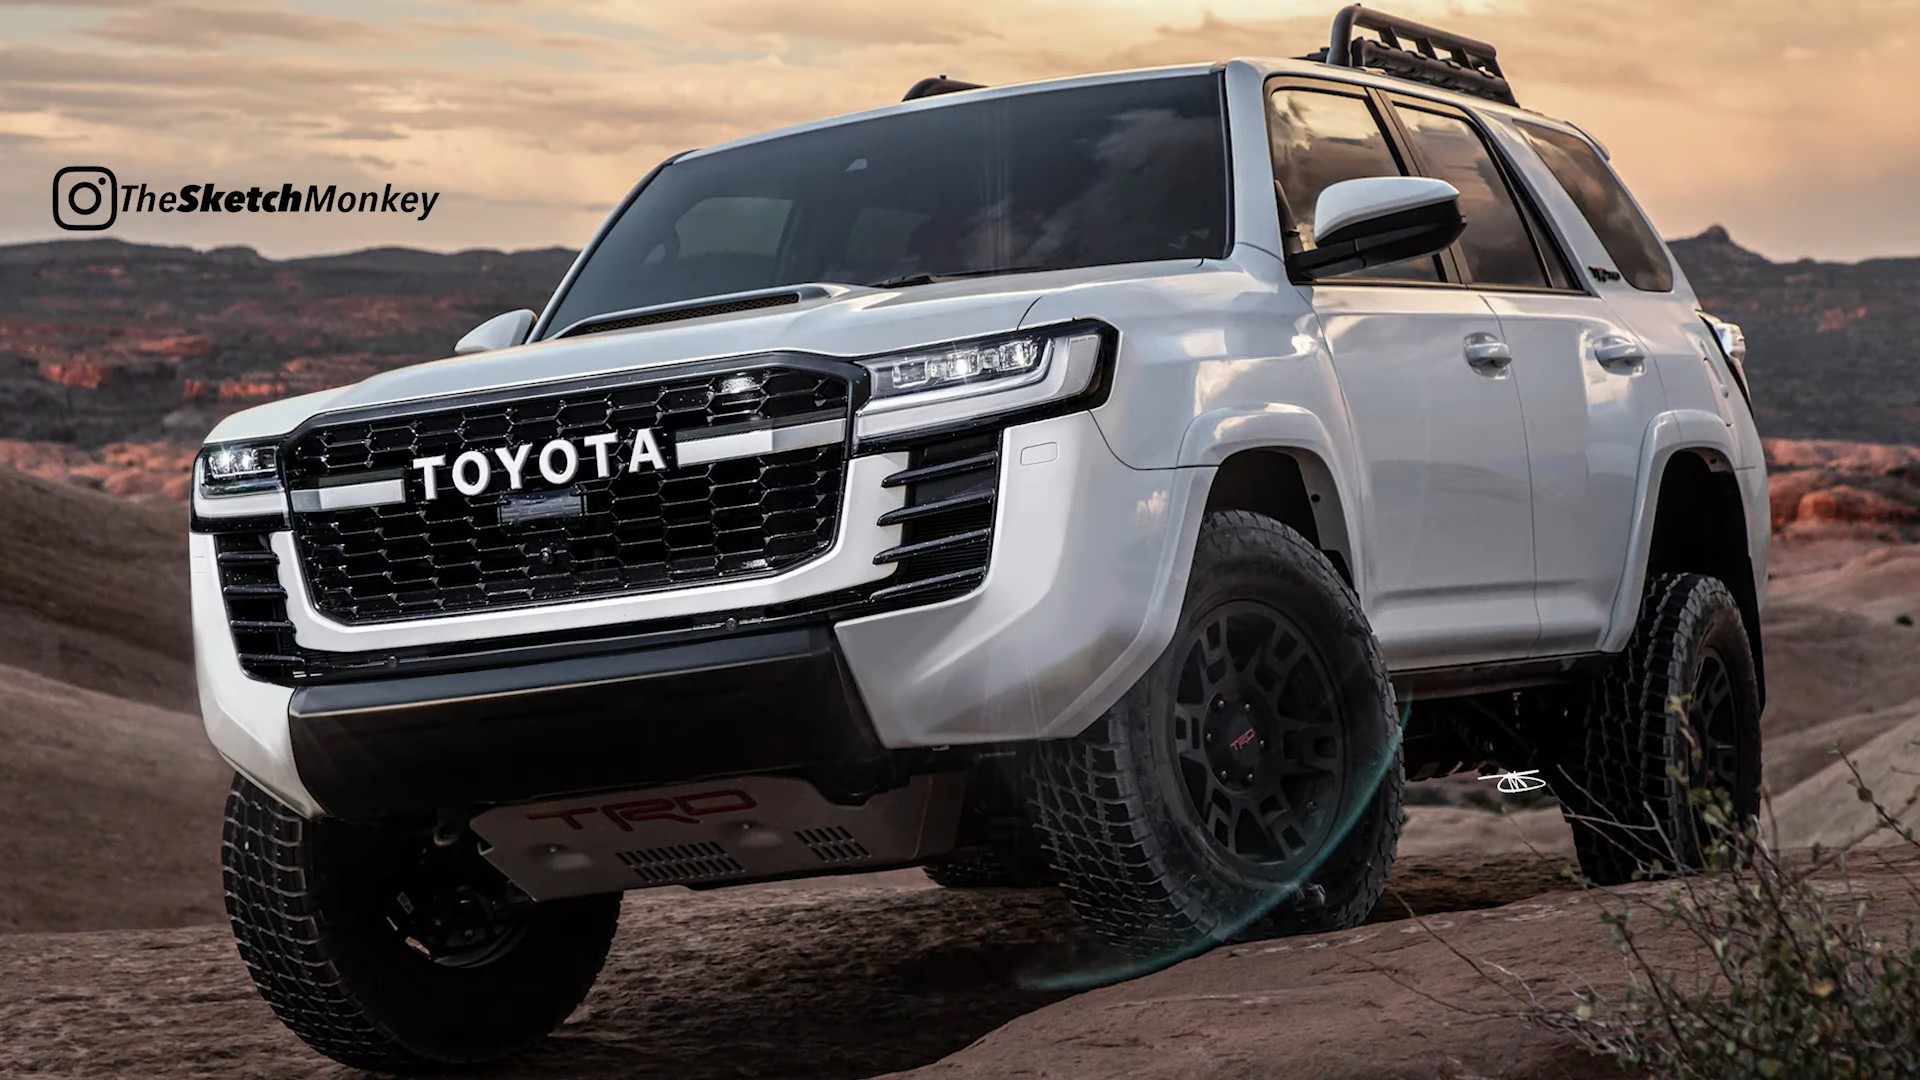 Sixth Gen Toyota 4Runner Comes to Life, Steals J300 Land Cruiser’s